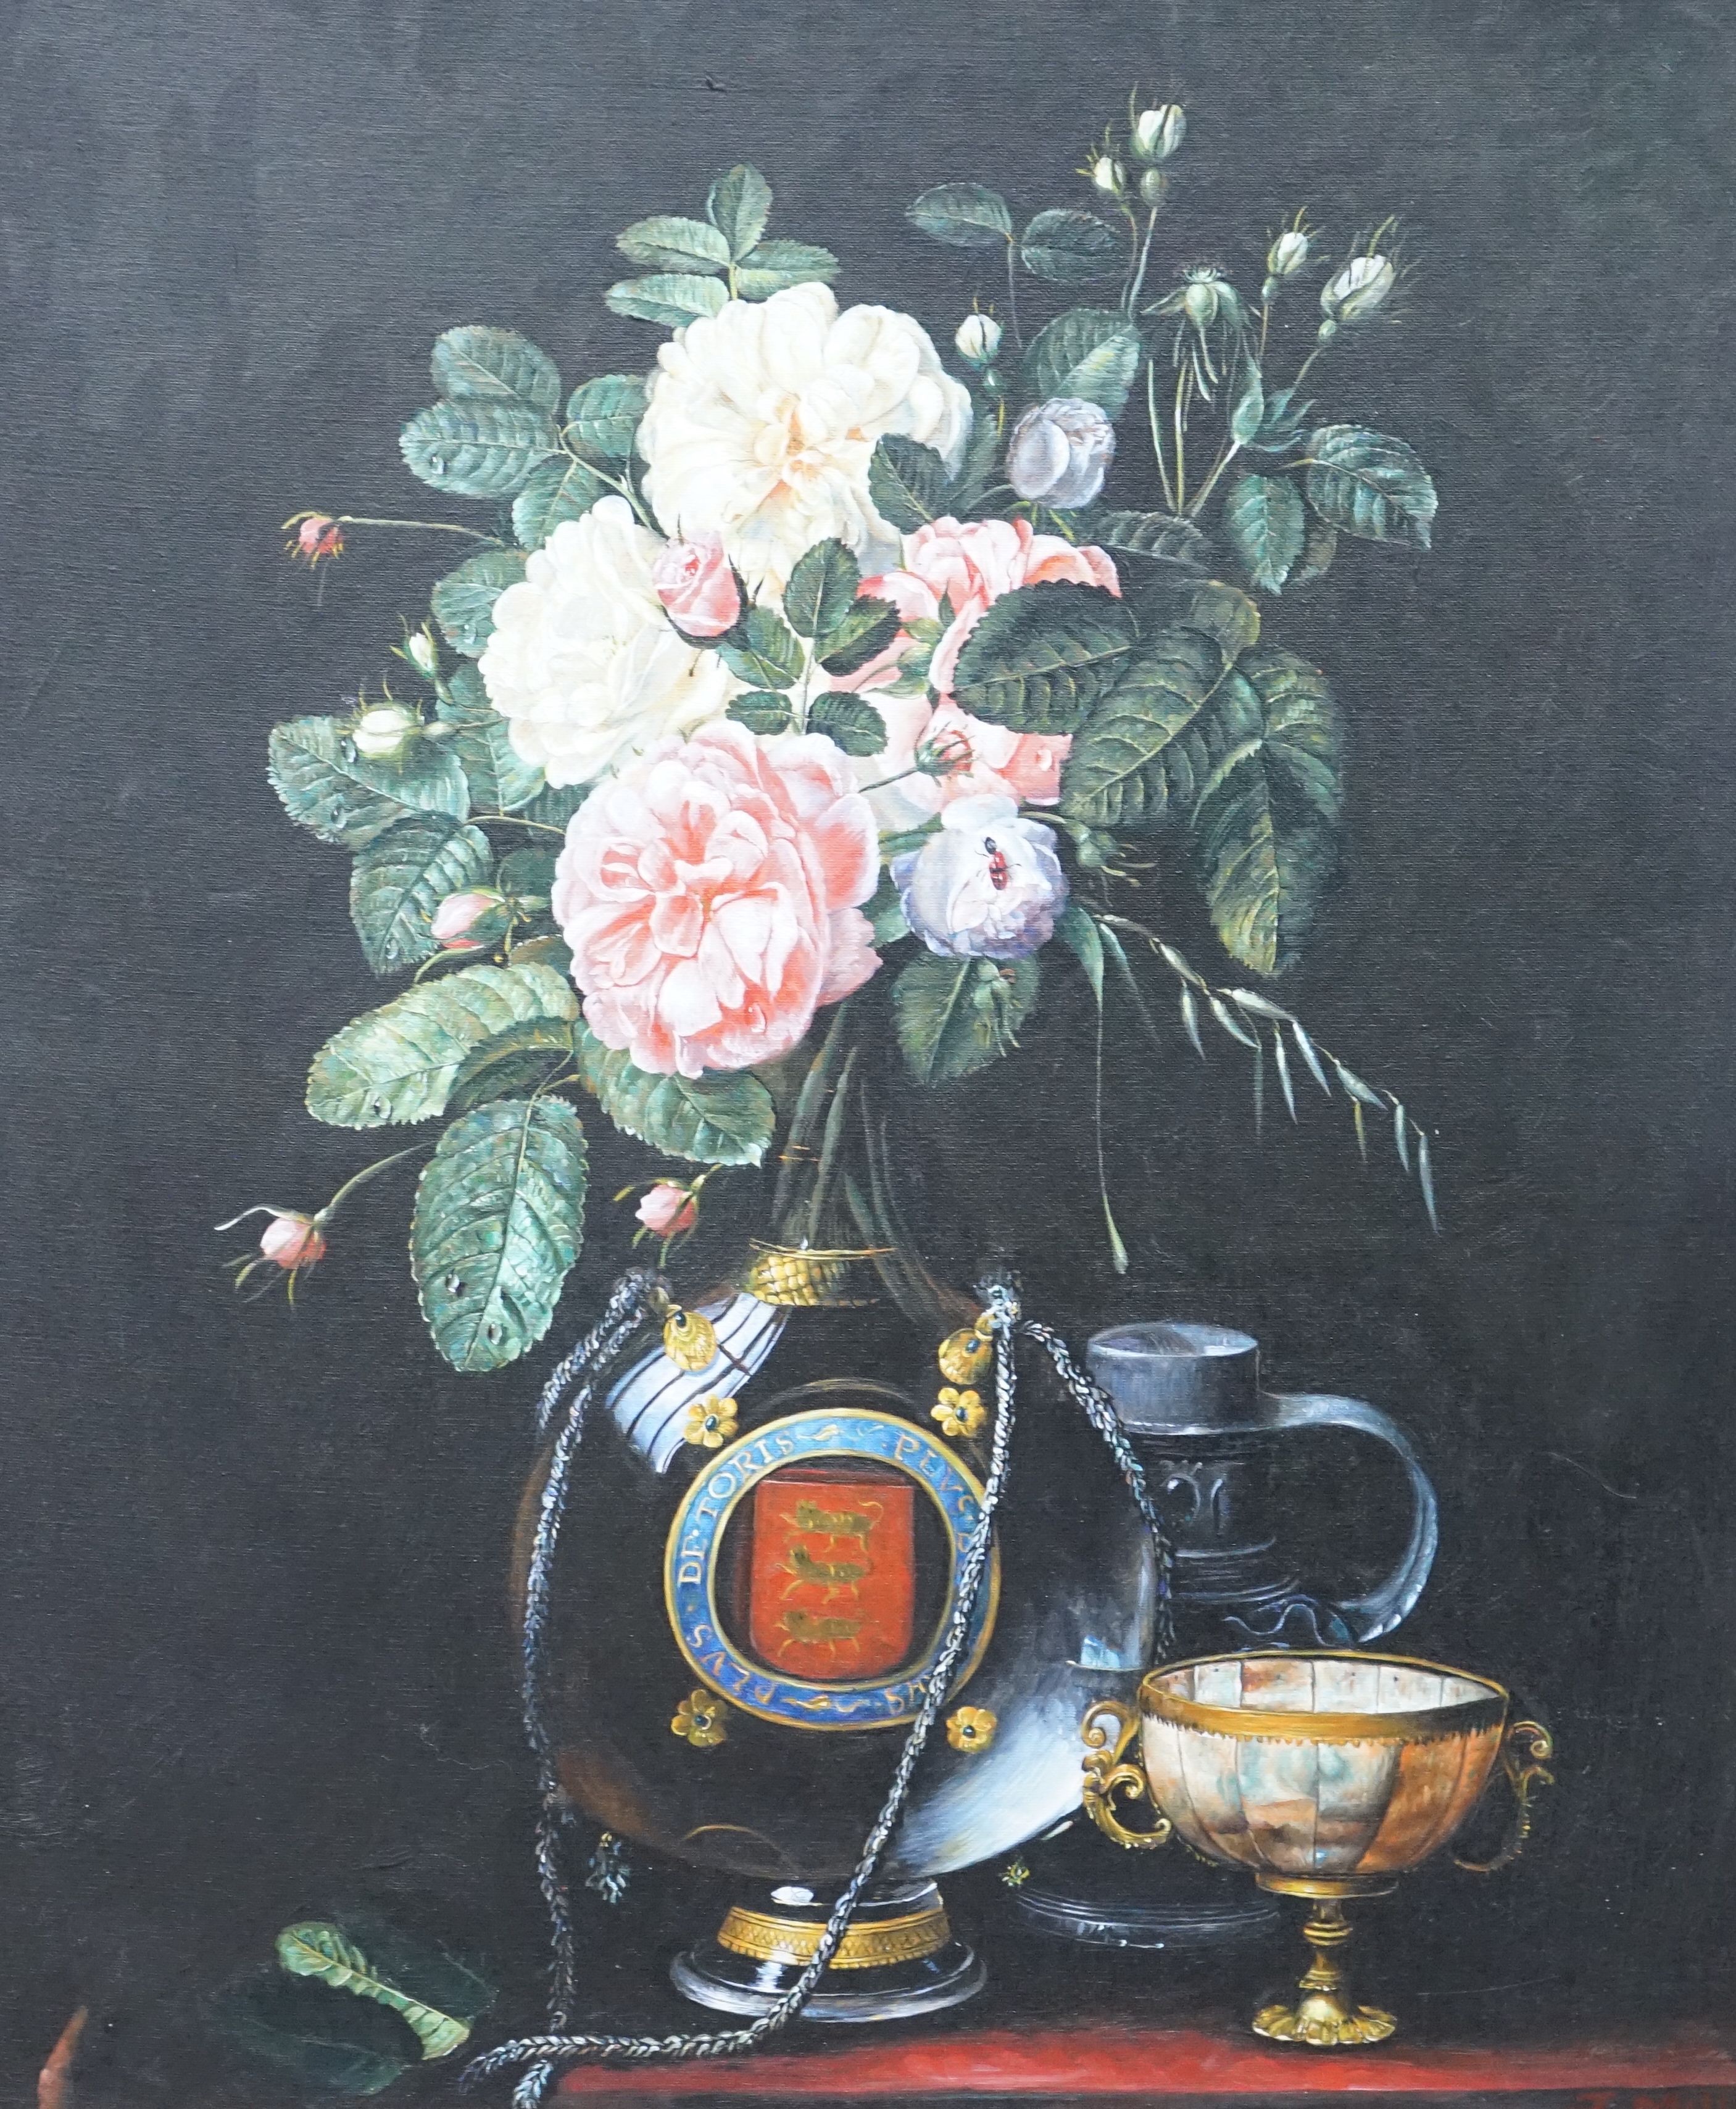 J. Mills, oil on canvas, 17th century style still life of roses in an ornate glass flask, signed, 59 x 49cm